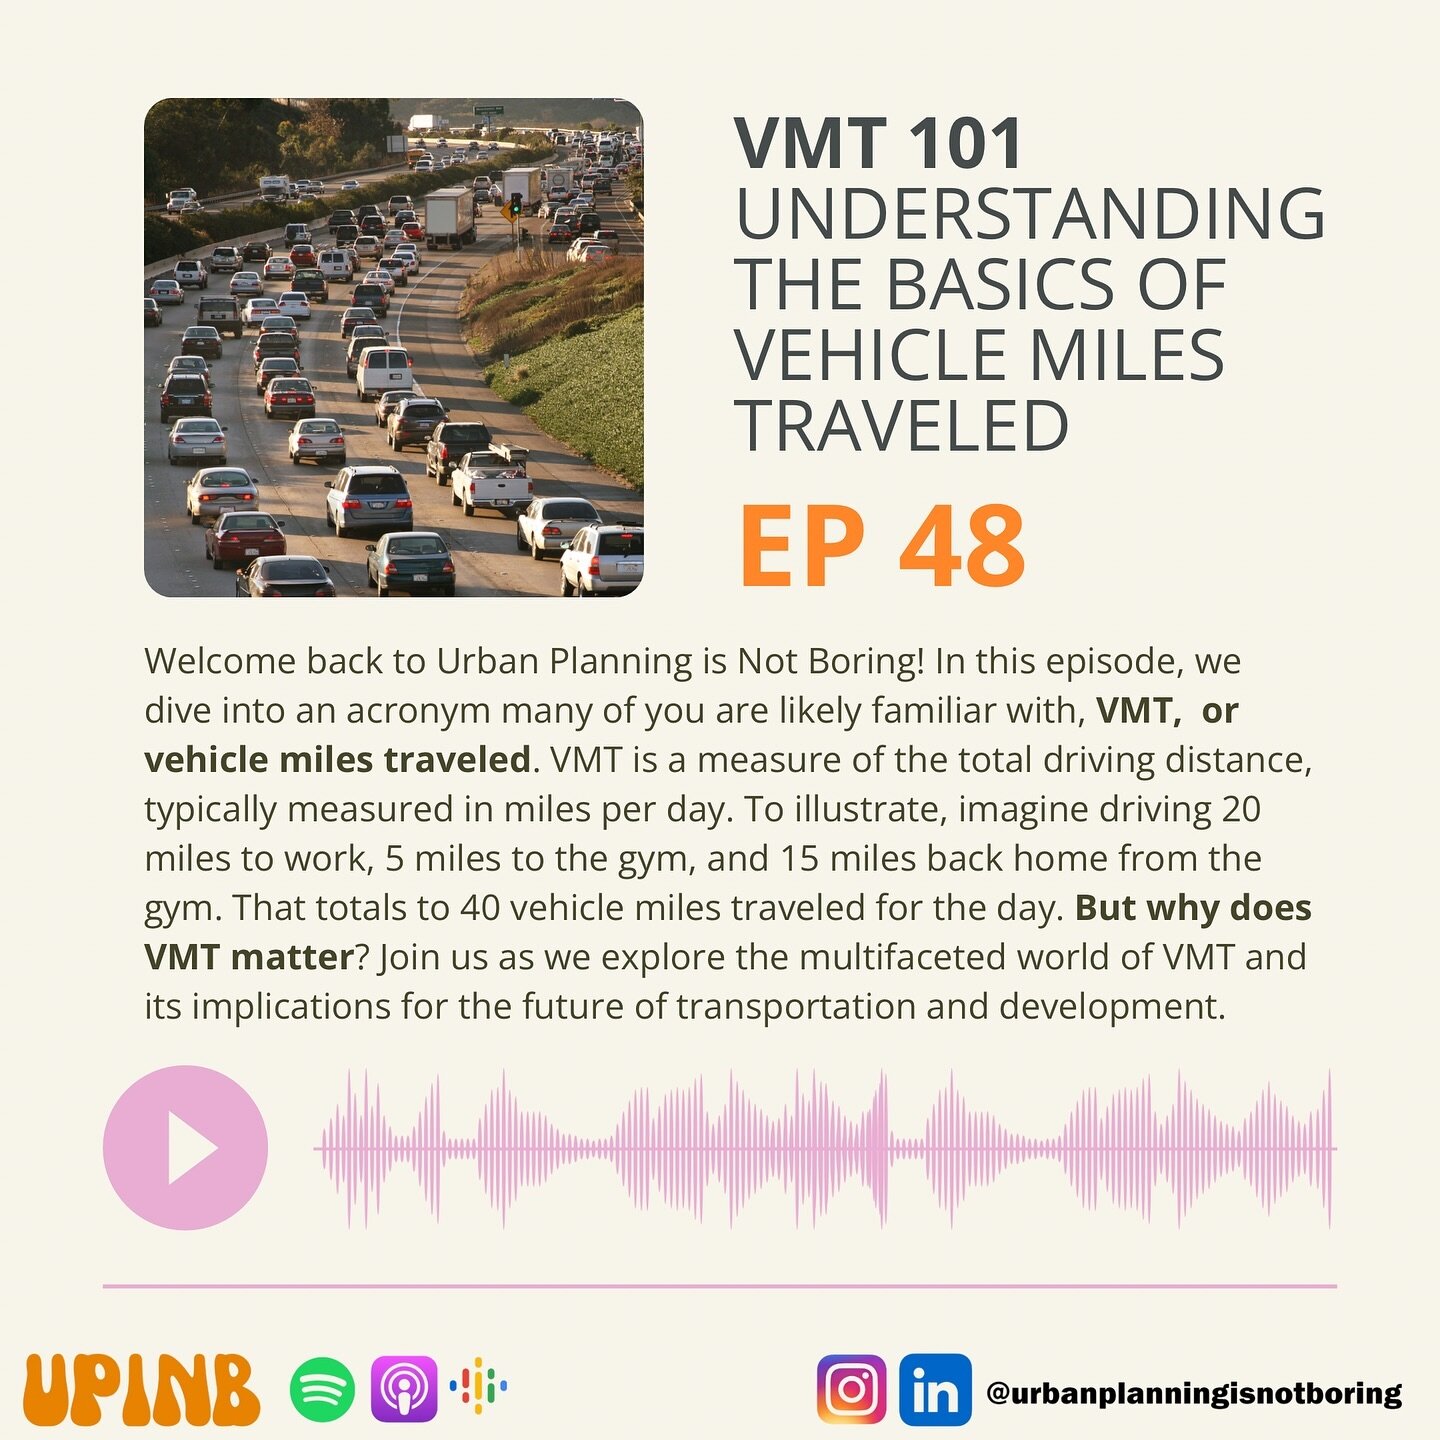 Welcome back to Urban Planning is Not Boring! In this episode, we dive into an acronym many of you are likely familiar with, VMT. We start by breaking down the concept of VMT - vehicle miles traveled - which essentially measures the total distance tr